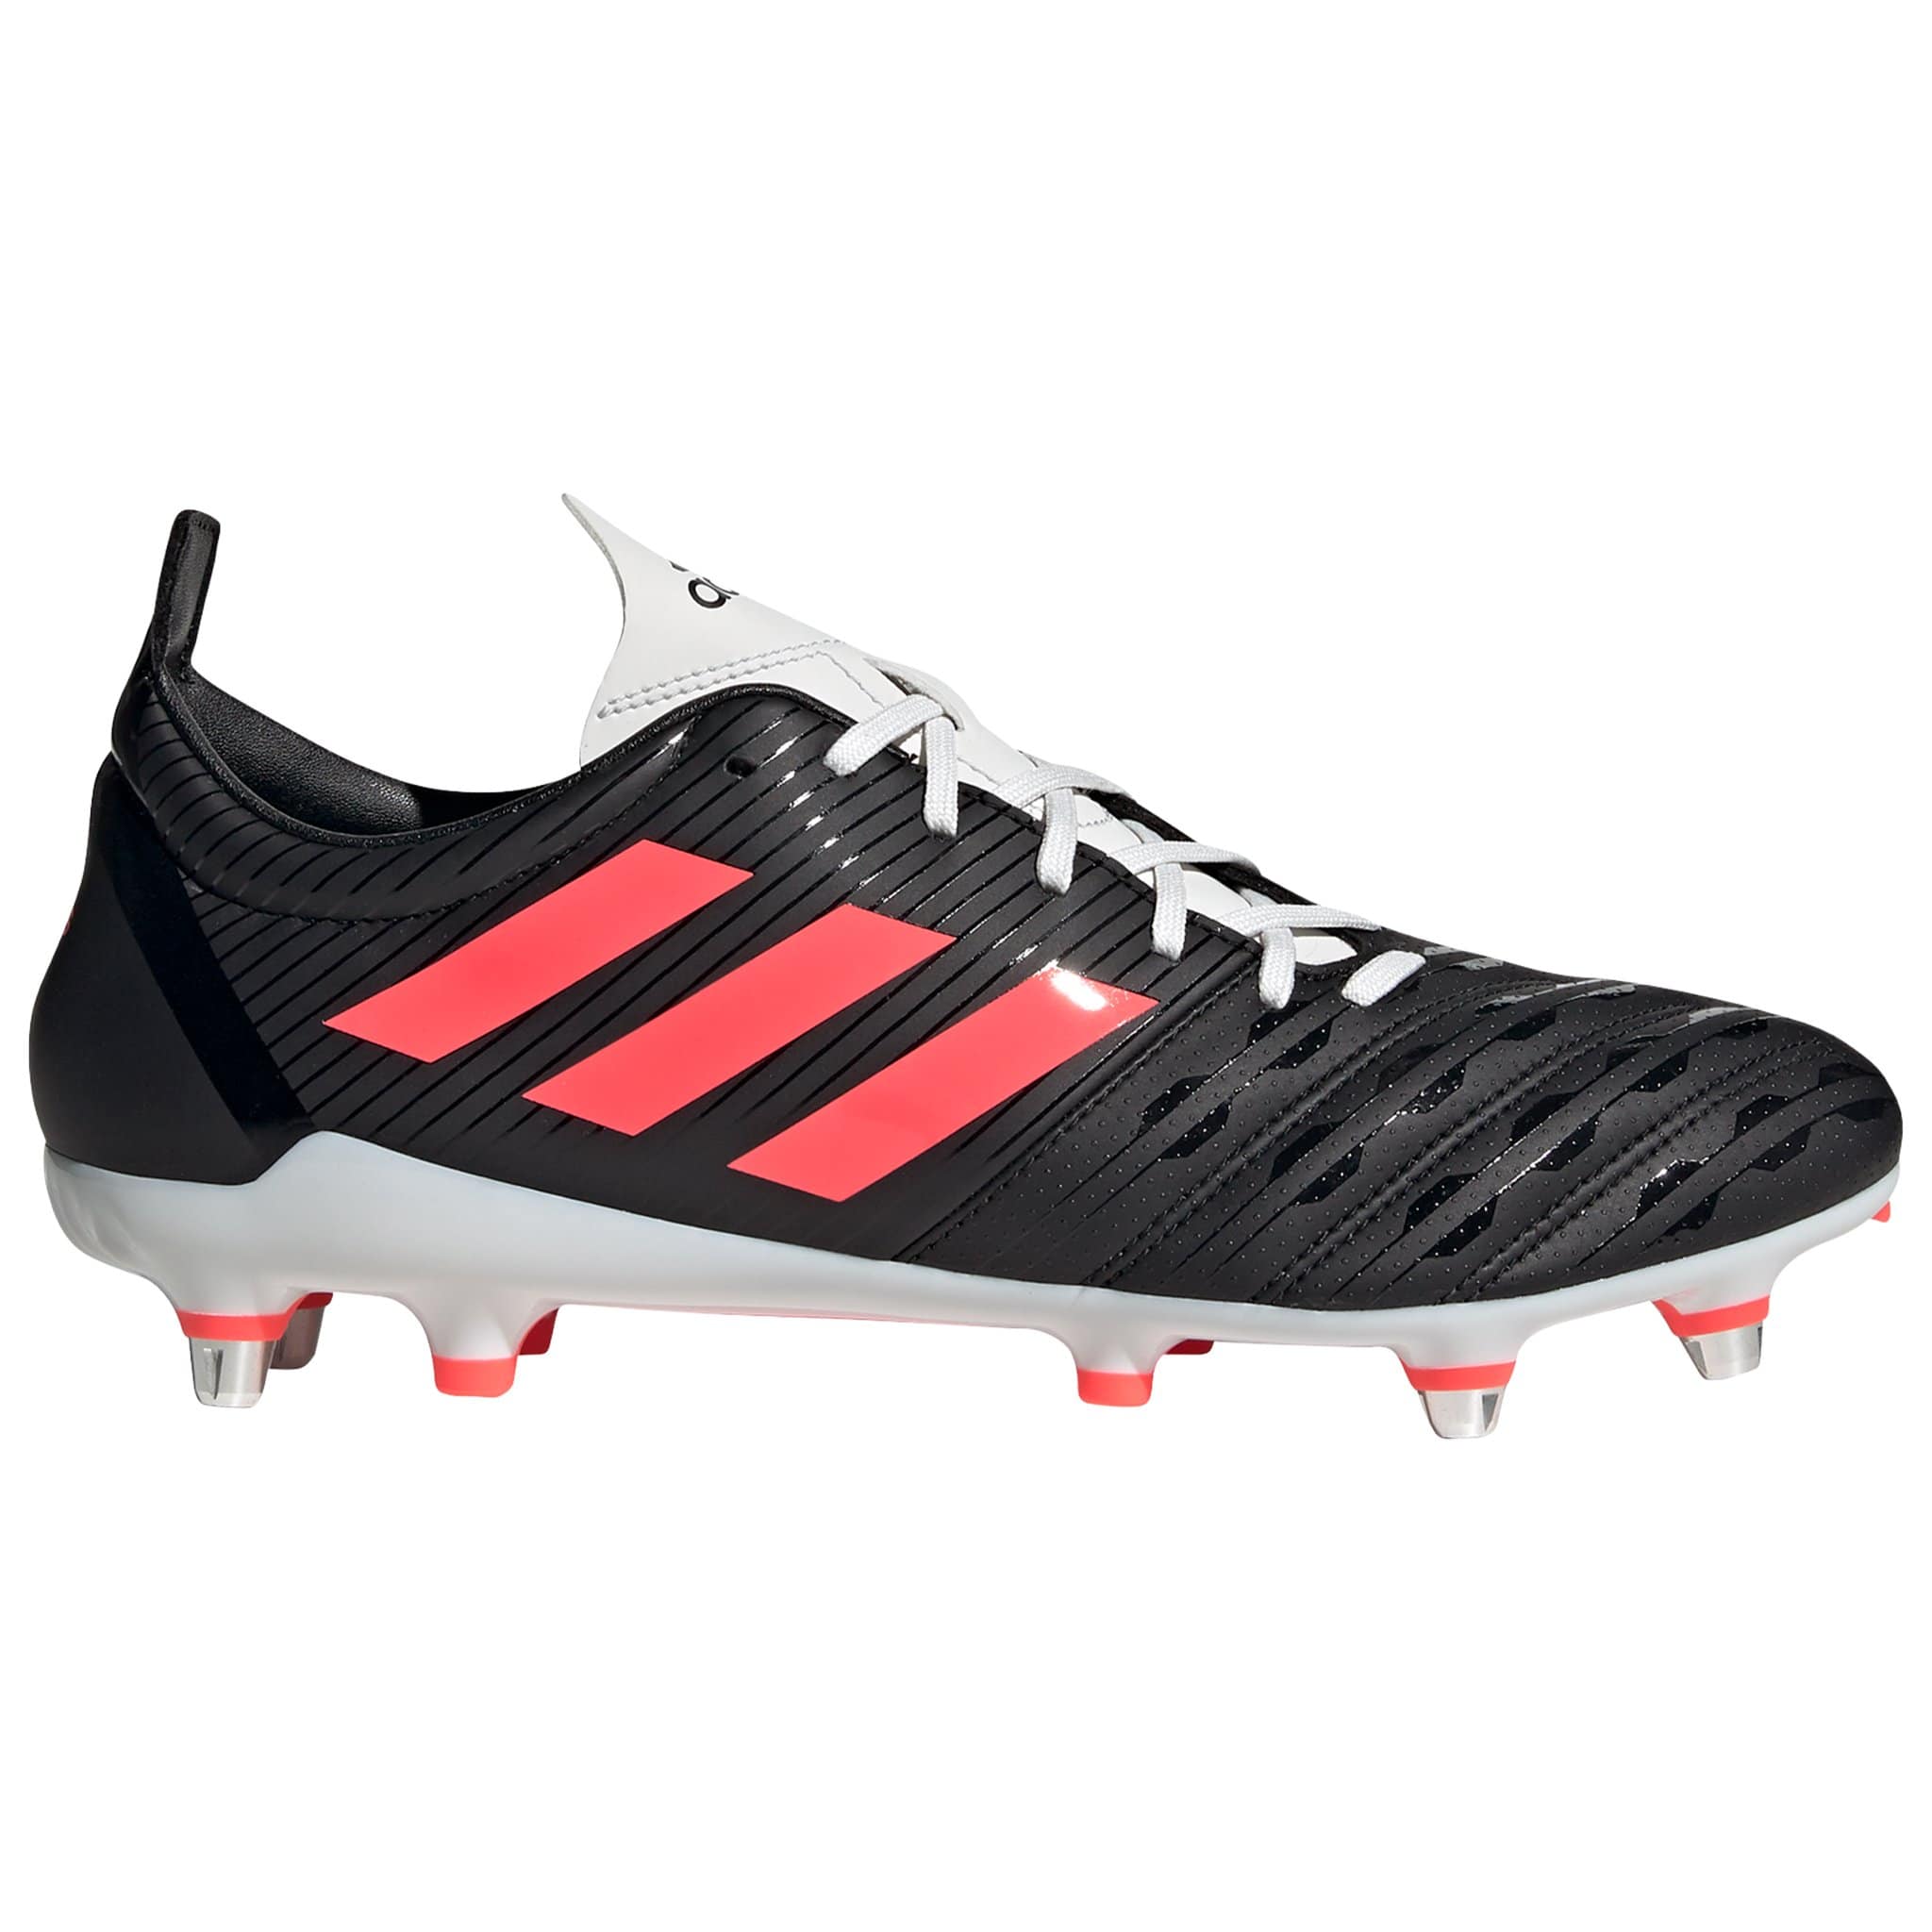 desagradable Murmullo Temeridad Adidas Malice Rugby Cleat - Soft Ground Boot - Core Black/ Signal Pink/  Crystal White - SKU FU8214 - World Rugby Shop